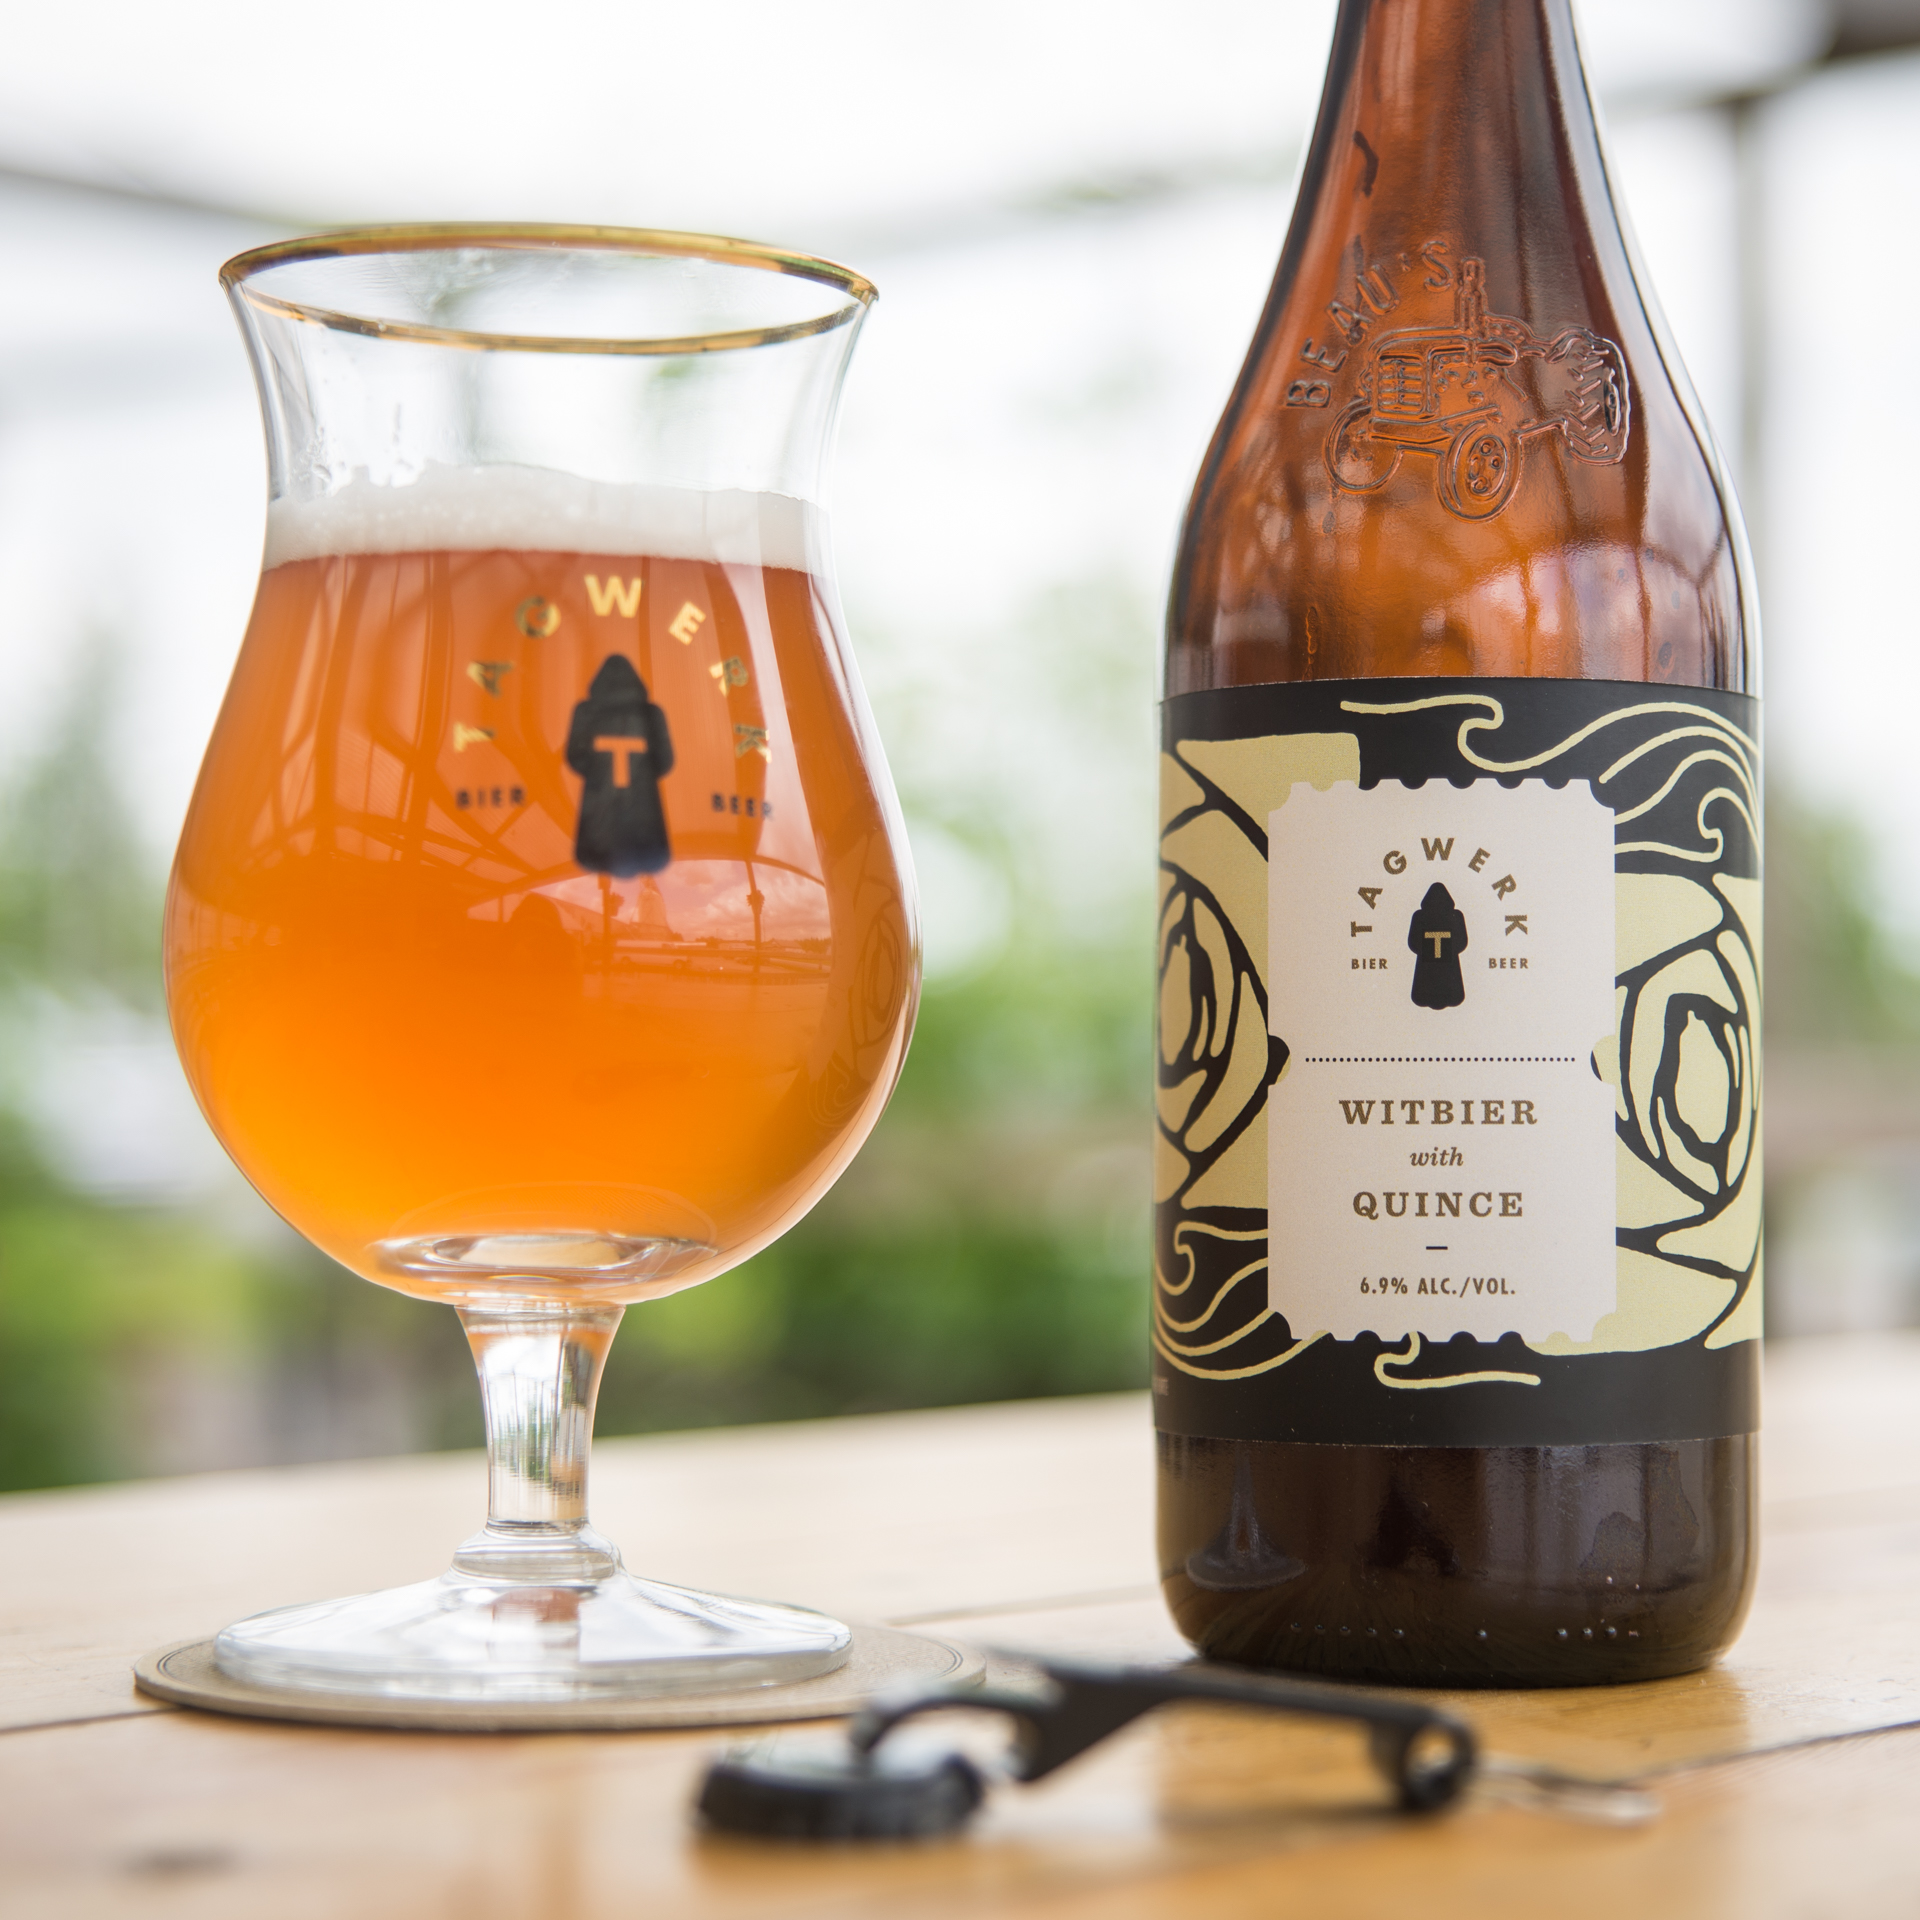 Tagwerk Beer: Witbier with Quince